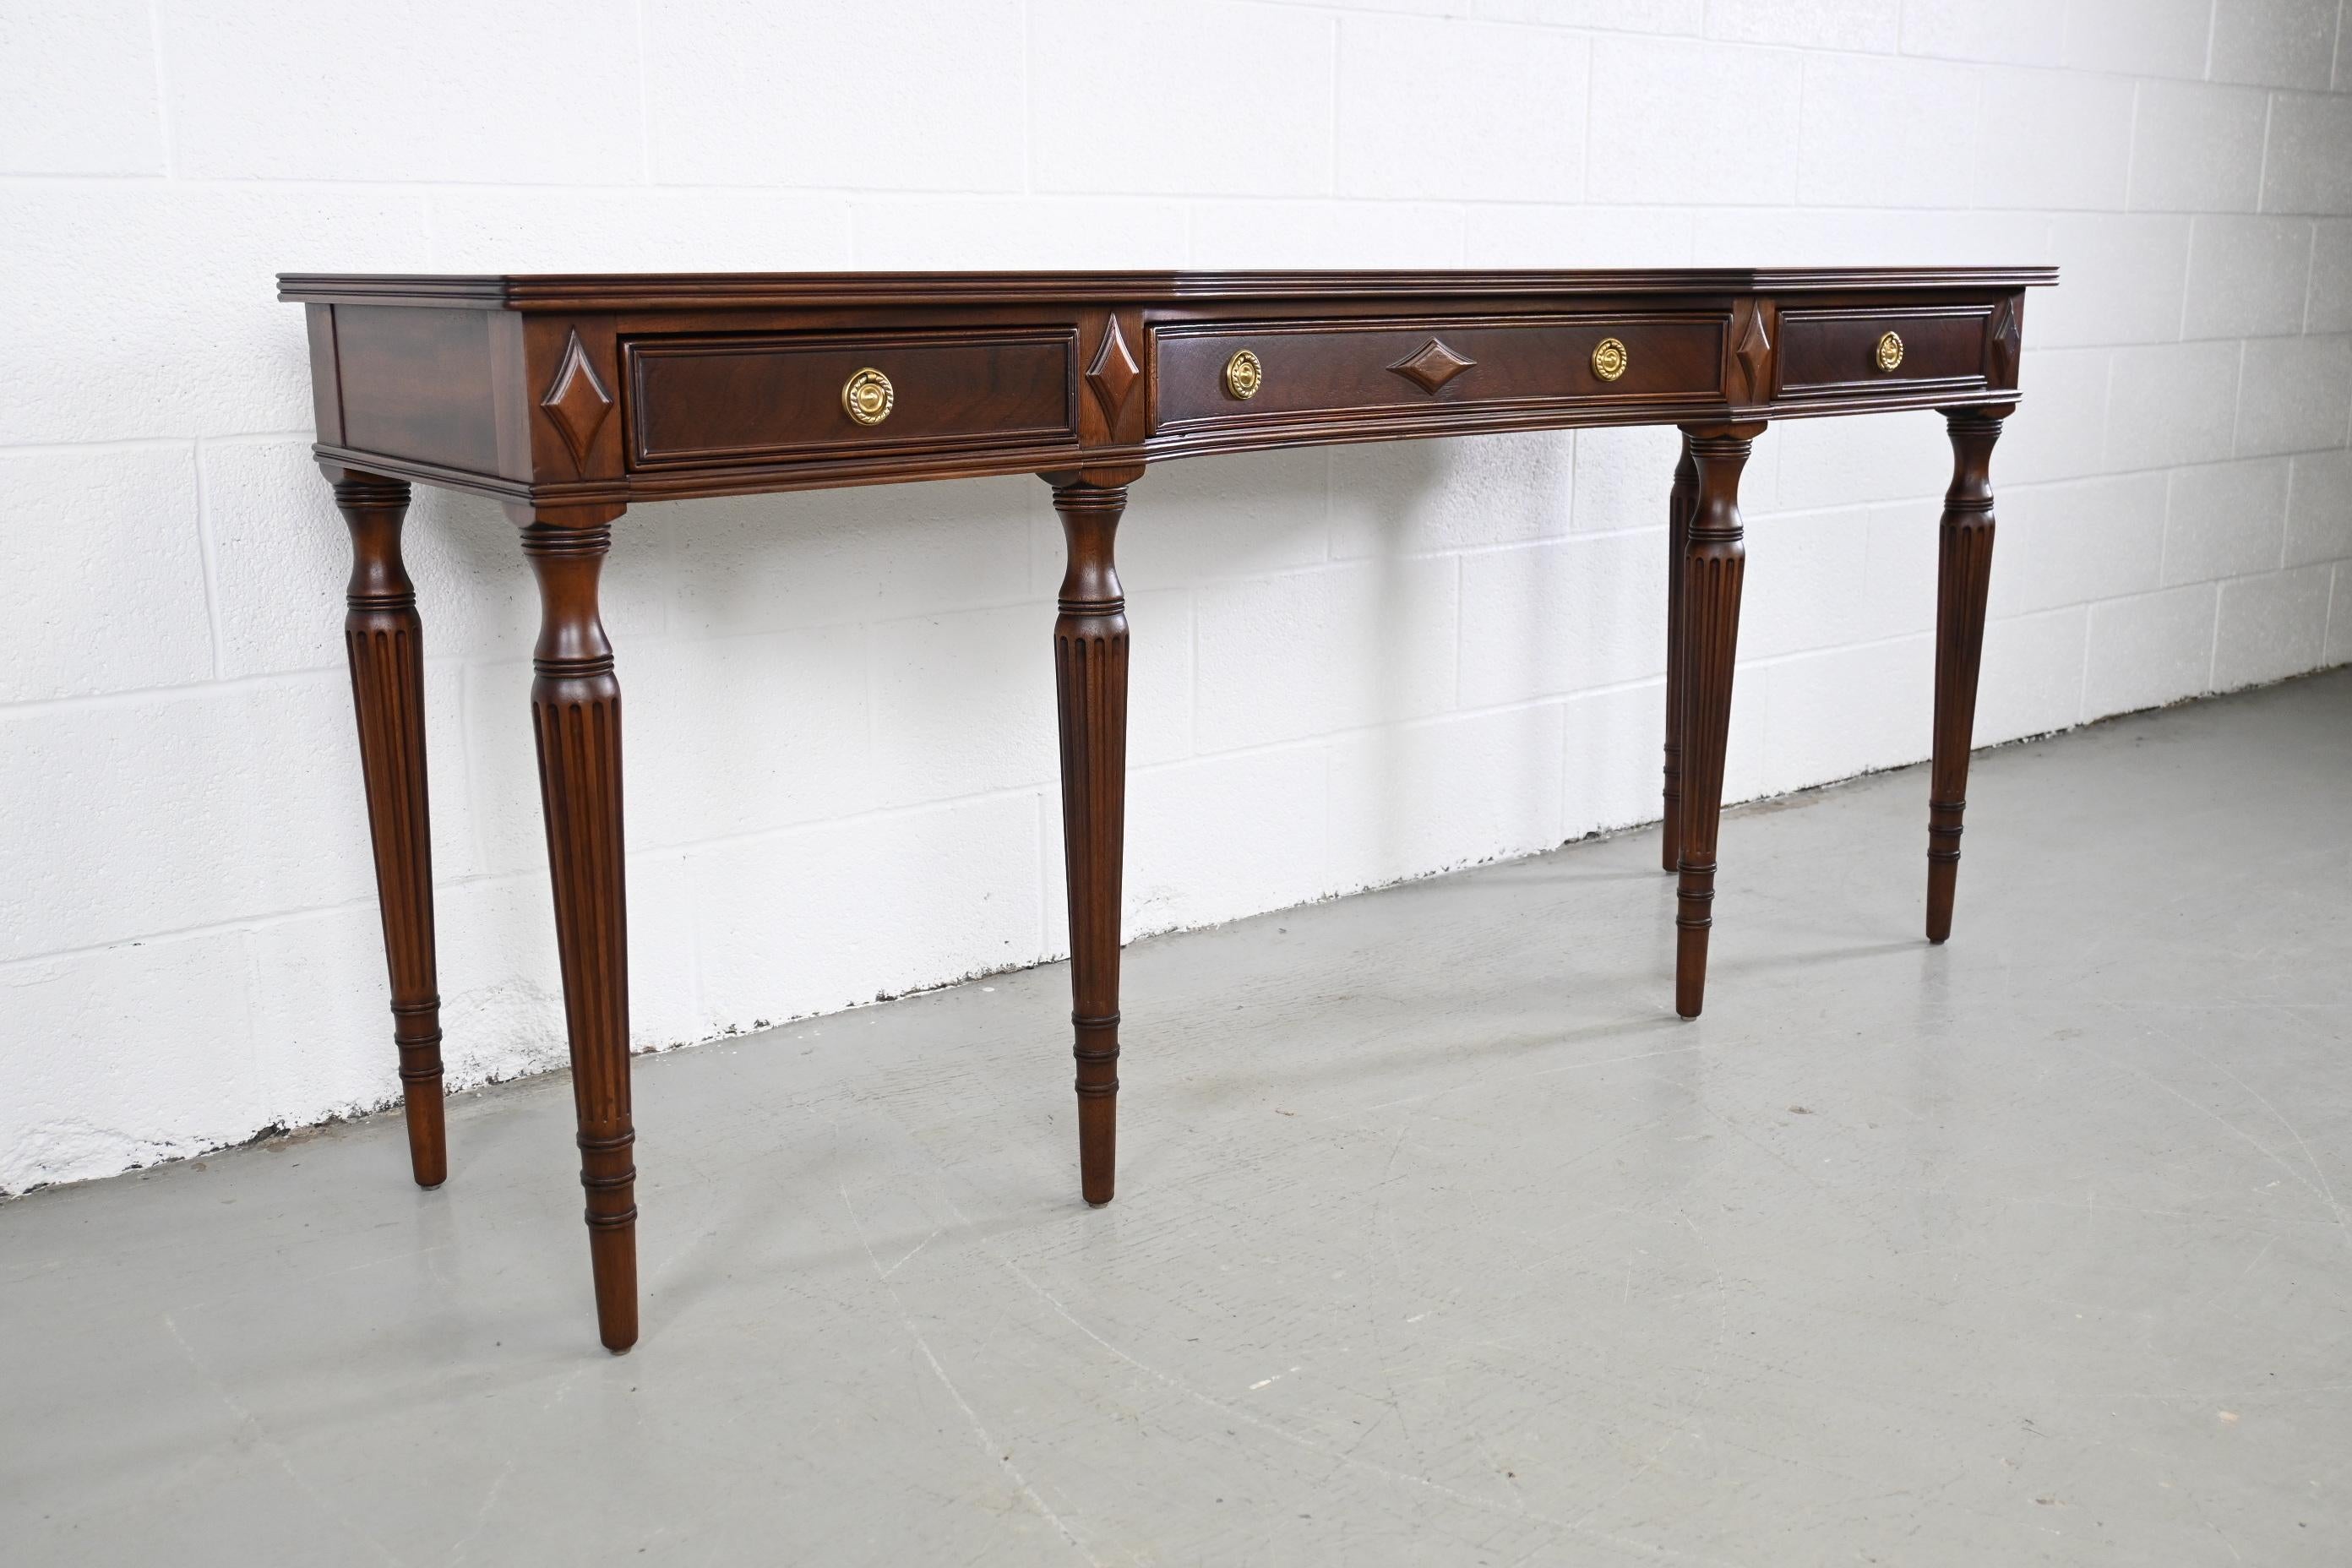 Henredon Furniture Traditional Regency style console or sofa table with three drawers

Henredon Furniture, USA, 1980s

Measures: 66 wide x 18 deep x 29.25 high.

Traditional regency style mahogany console table with inlaid trim and a banded